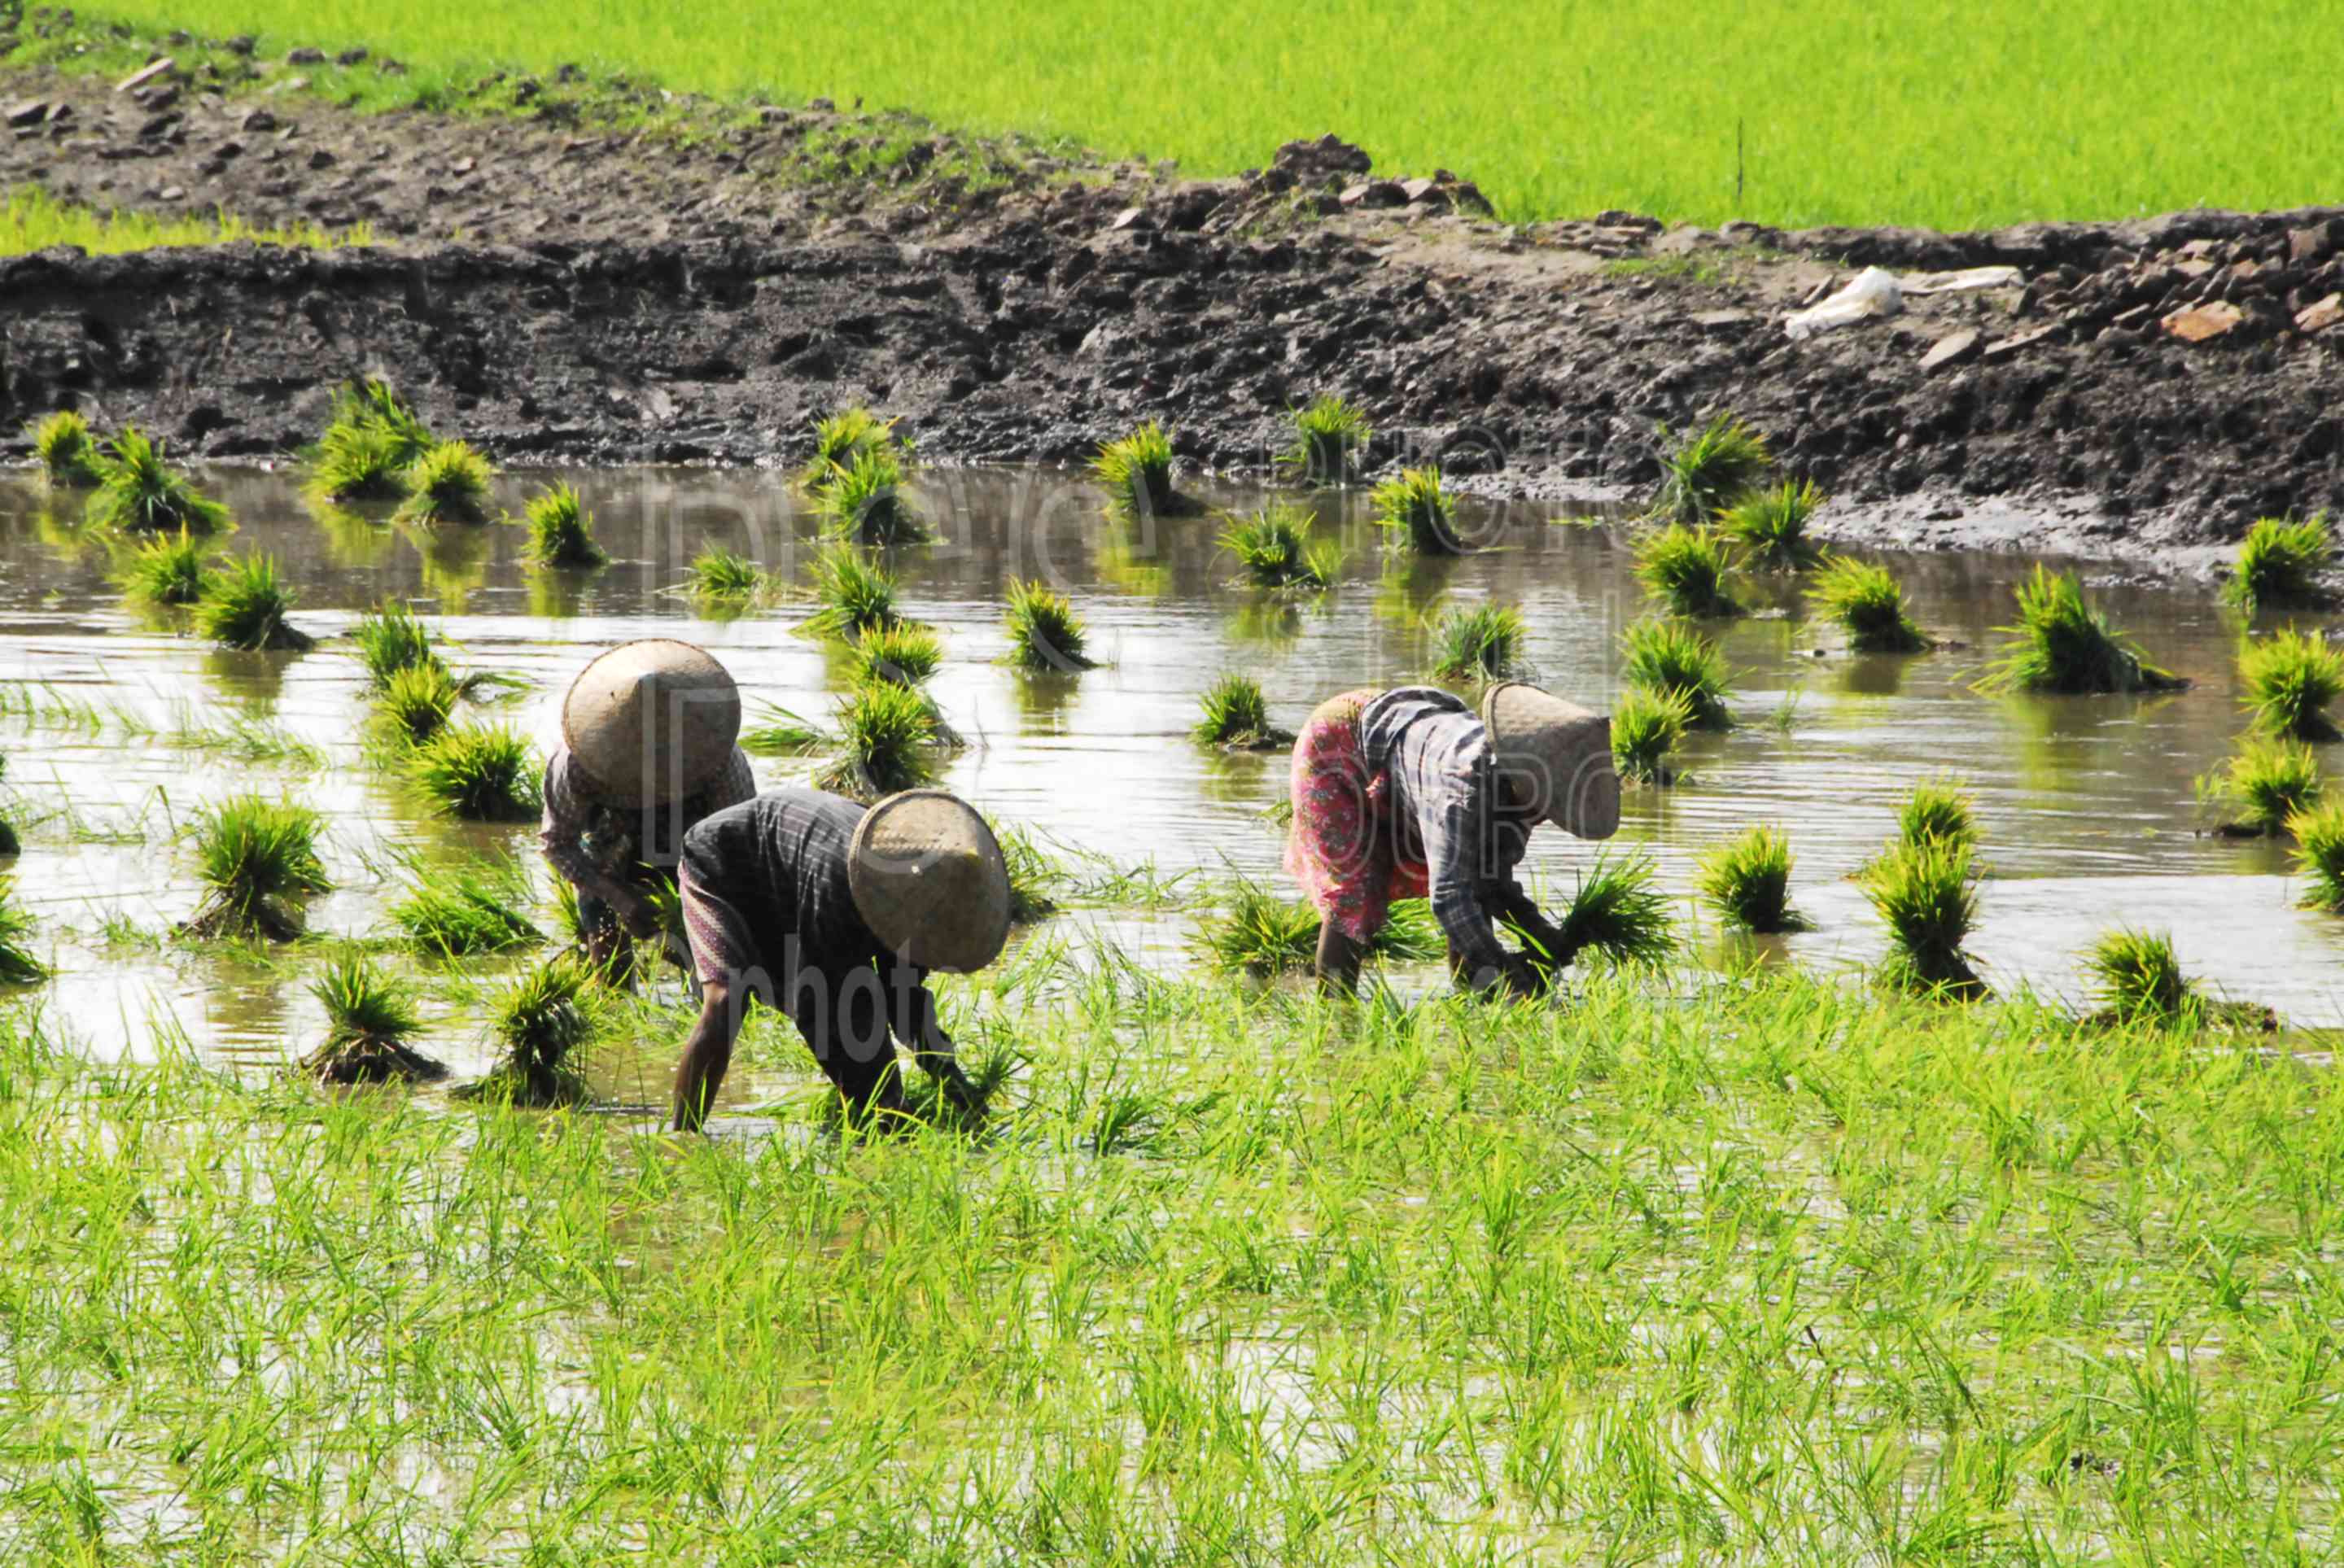 Rice Field Workers,myanmar,inwa,hathawaddy,ava,women,working,rice,fields,paddy,rice paddy,temple,people